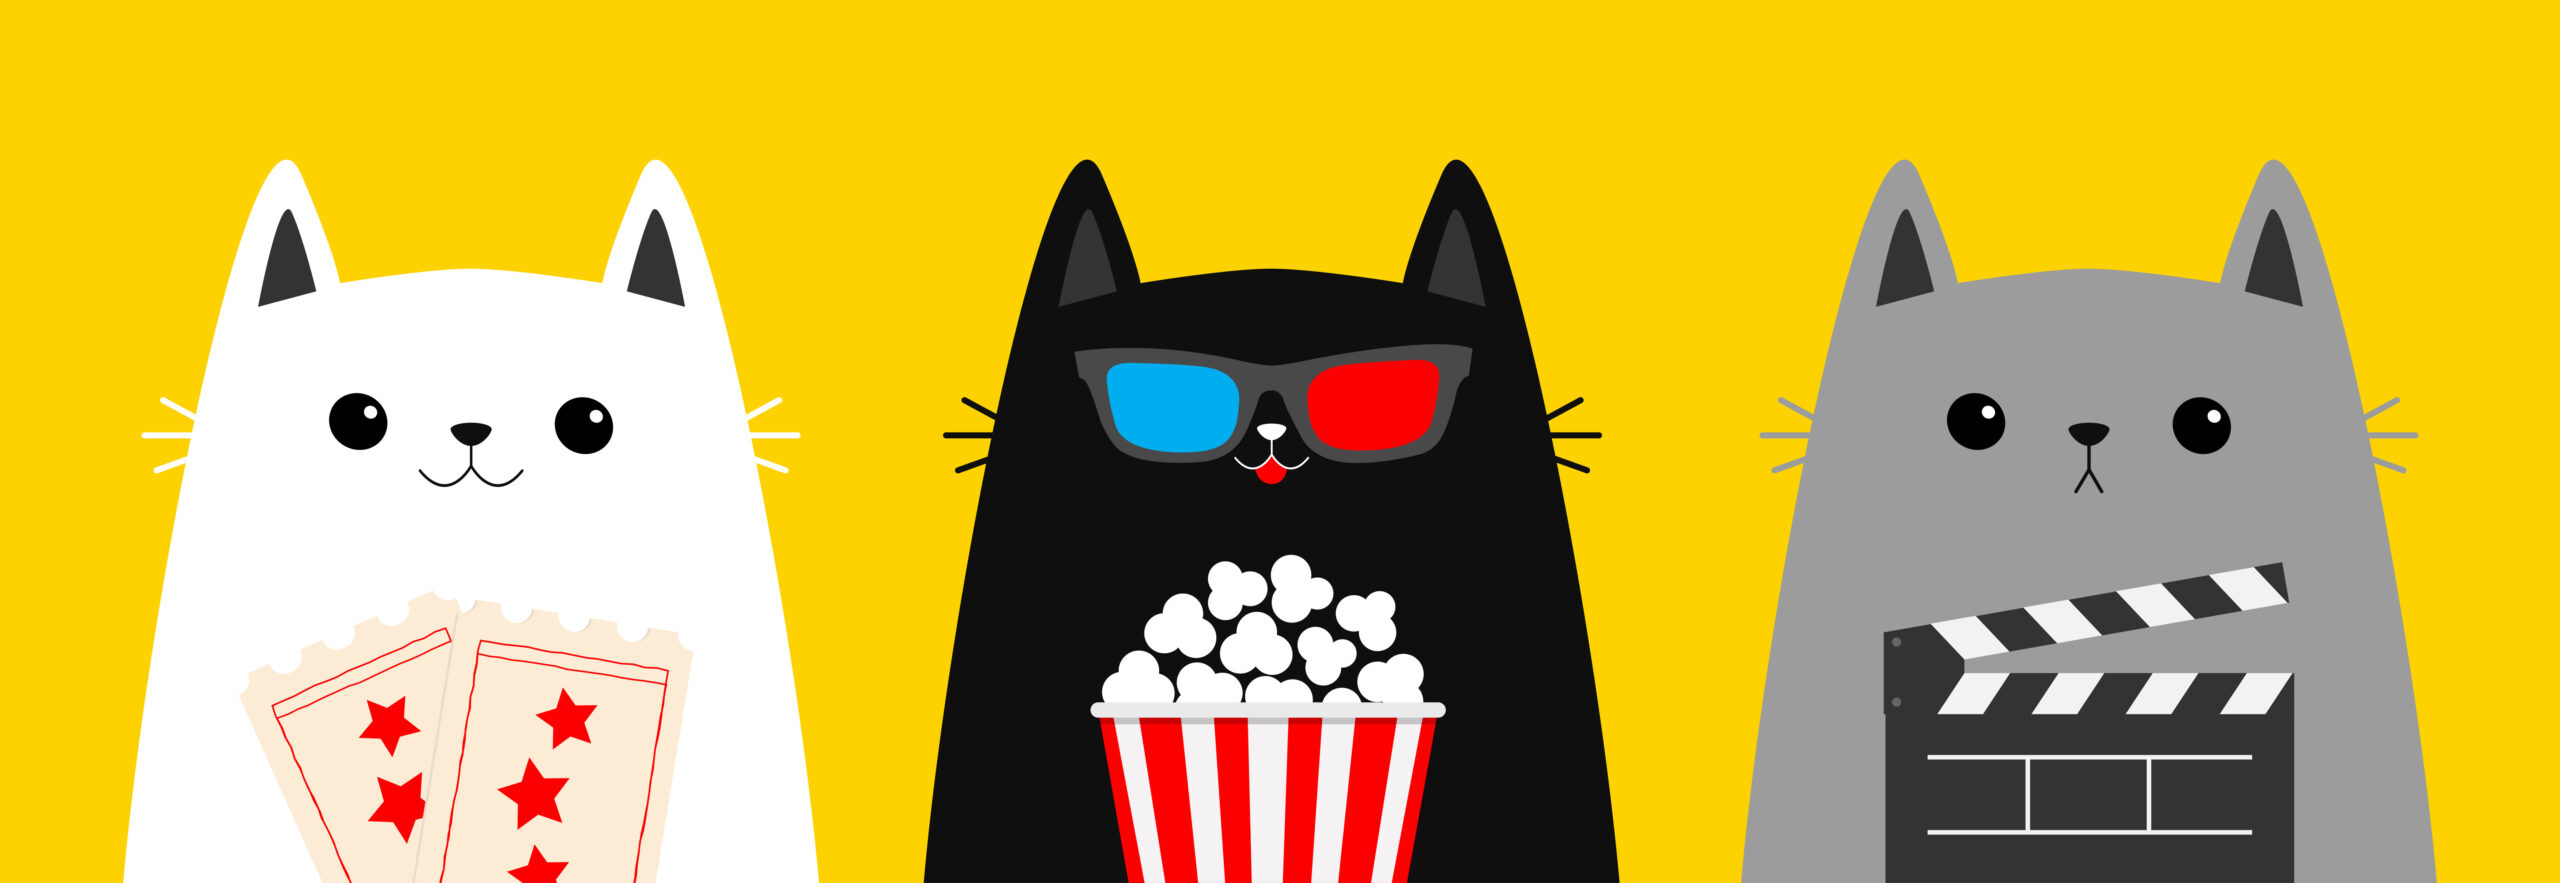 Illustration of three cartoon cats: a white one holding two movie tickets, a black one in 3D glasses holding popcorn, and a grey one holding a director's clapboard. All against a yellow background.